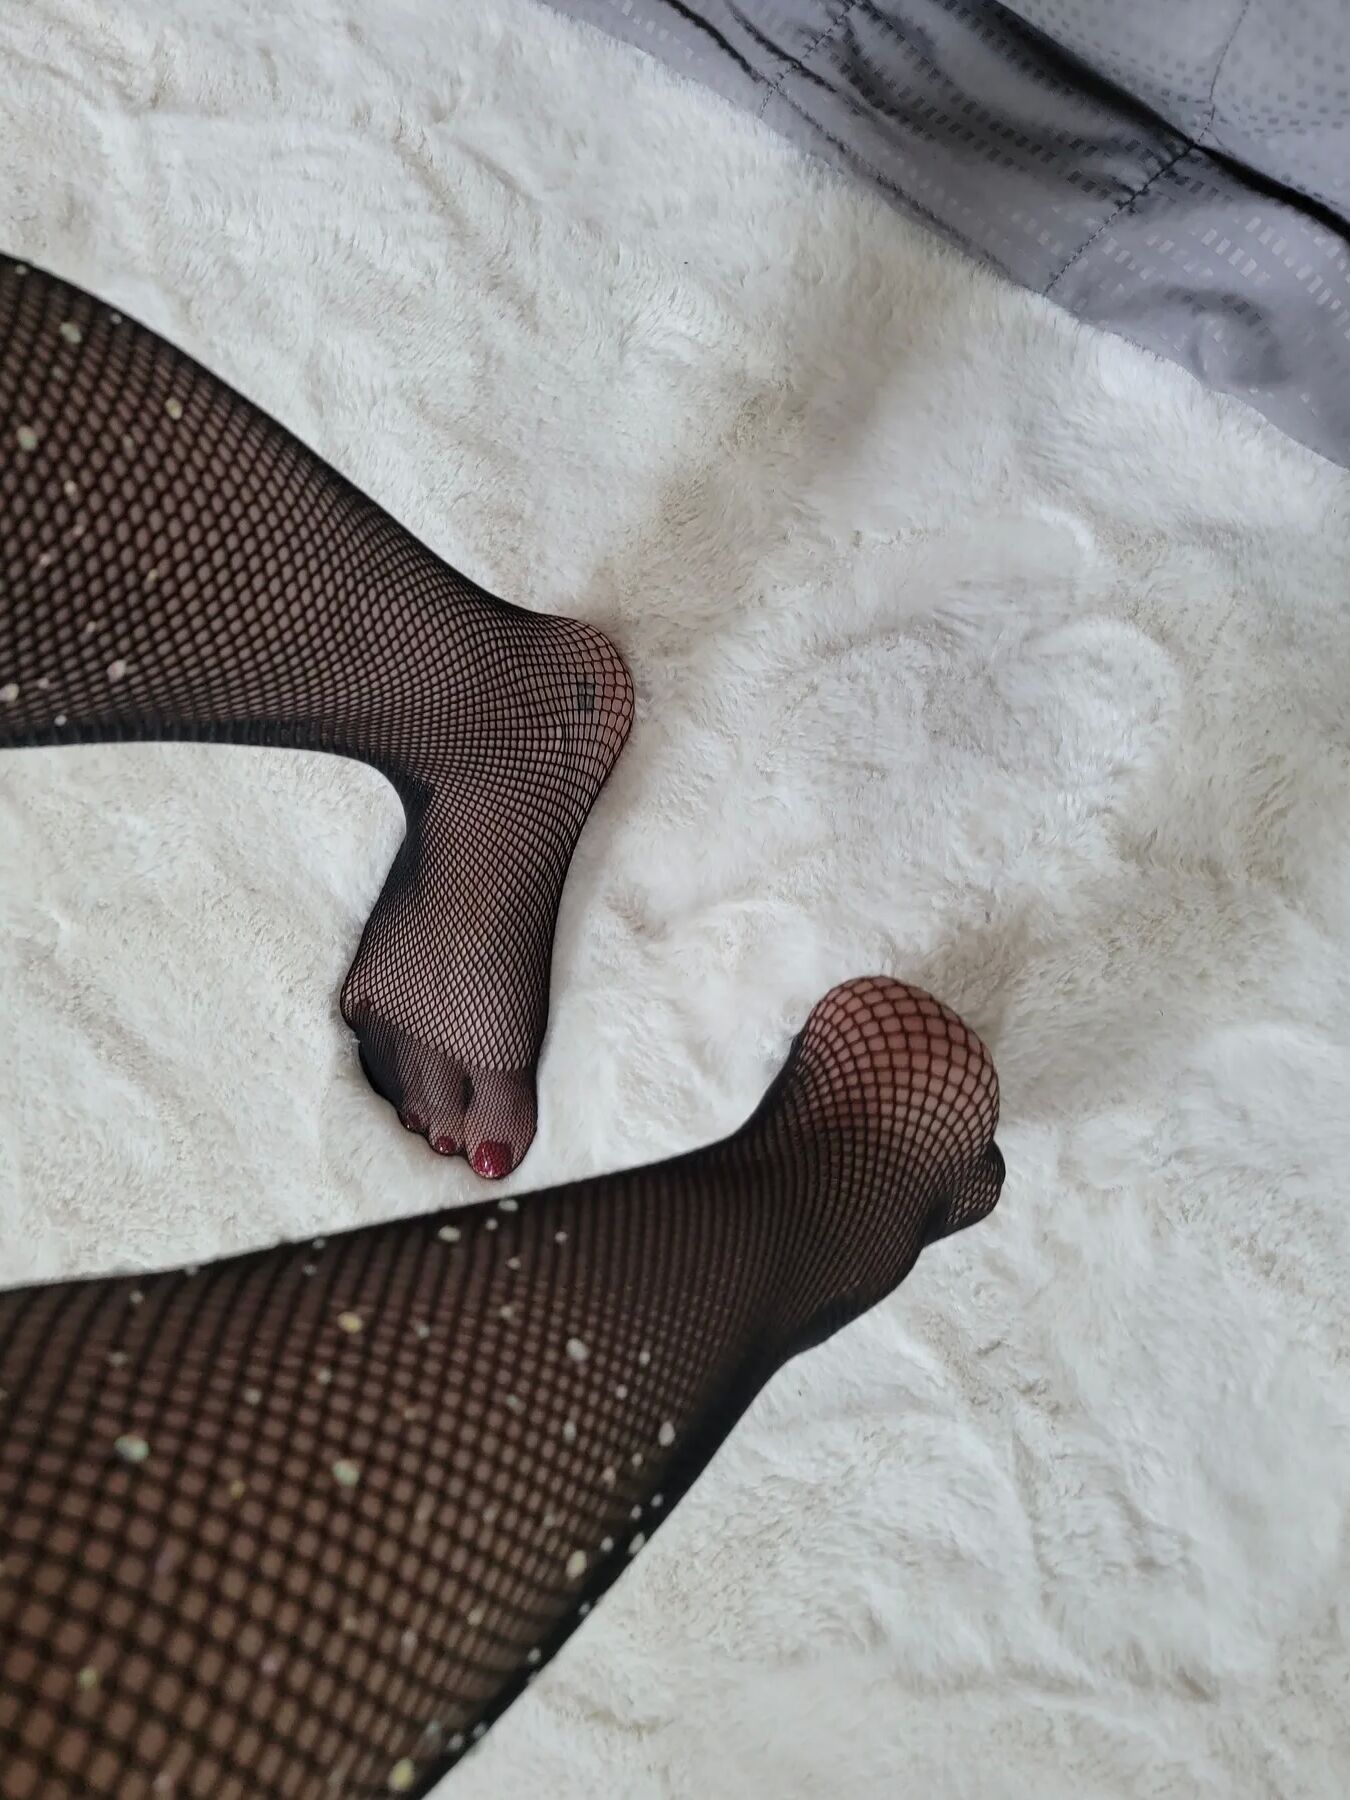 Nylons and toe rings